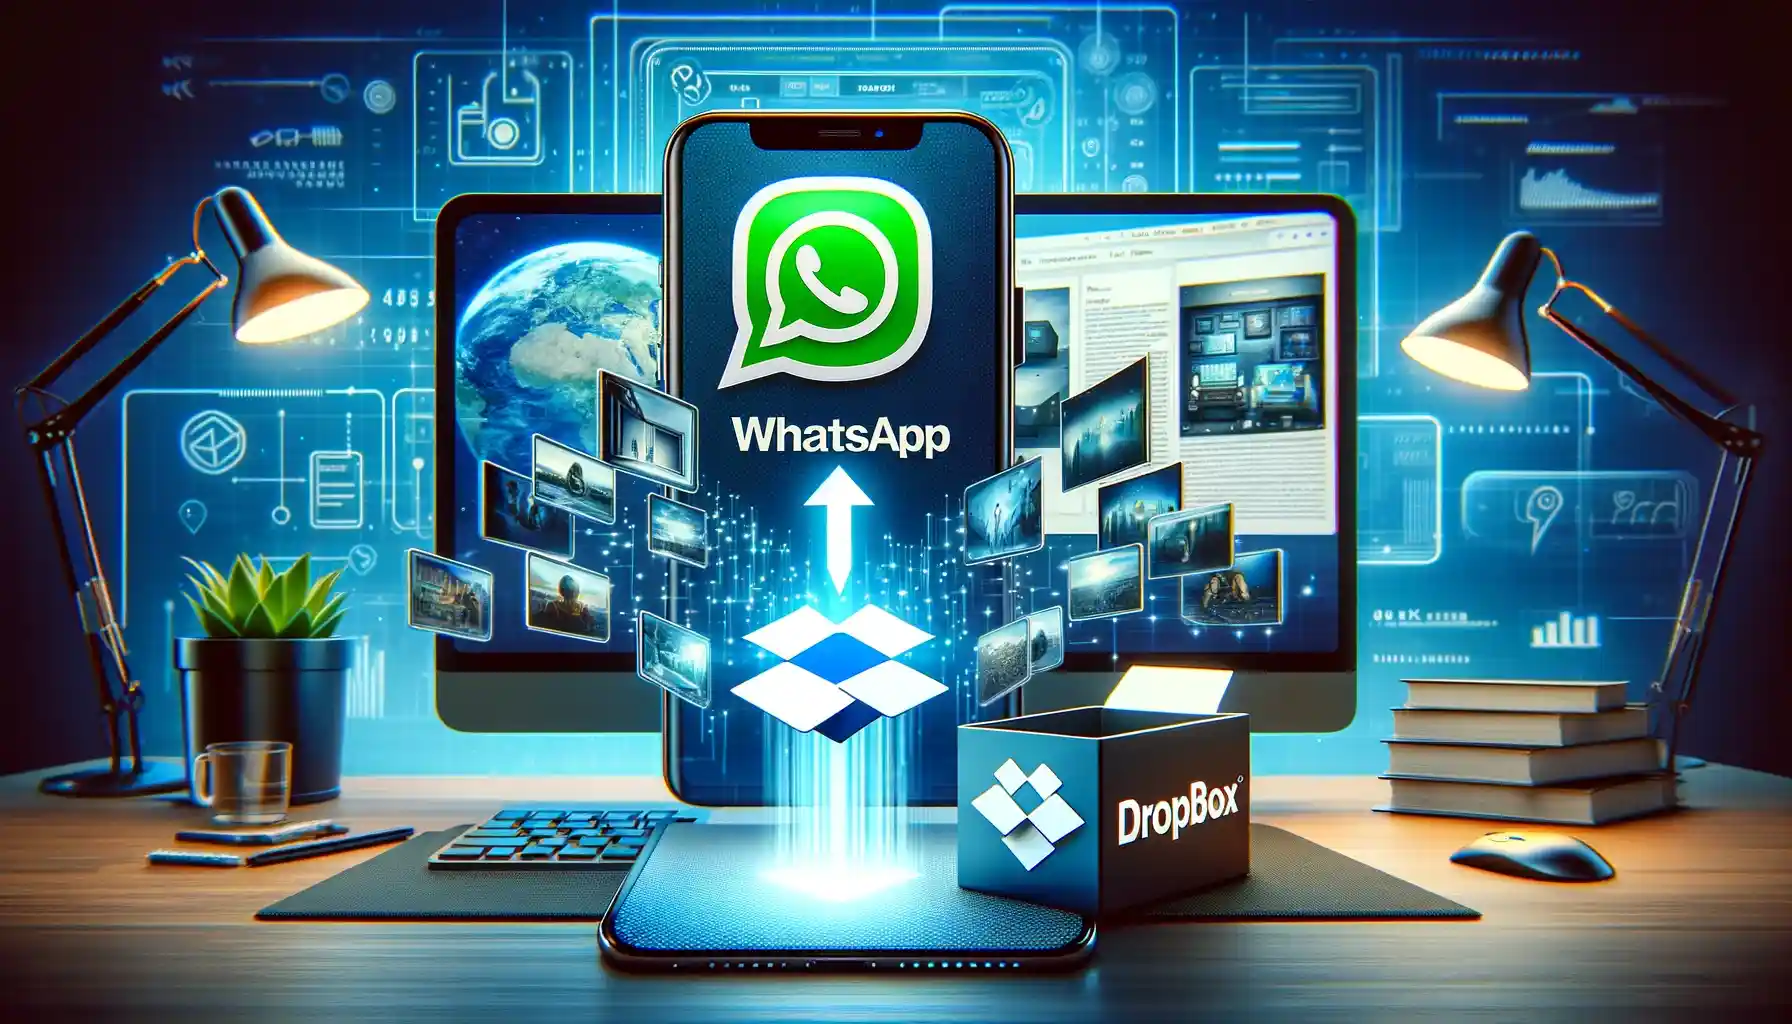 How to Backup WhatsApp Videos to Dropbox